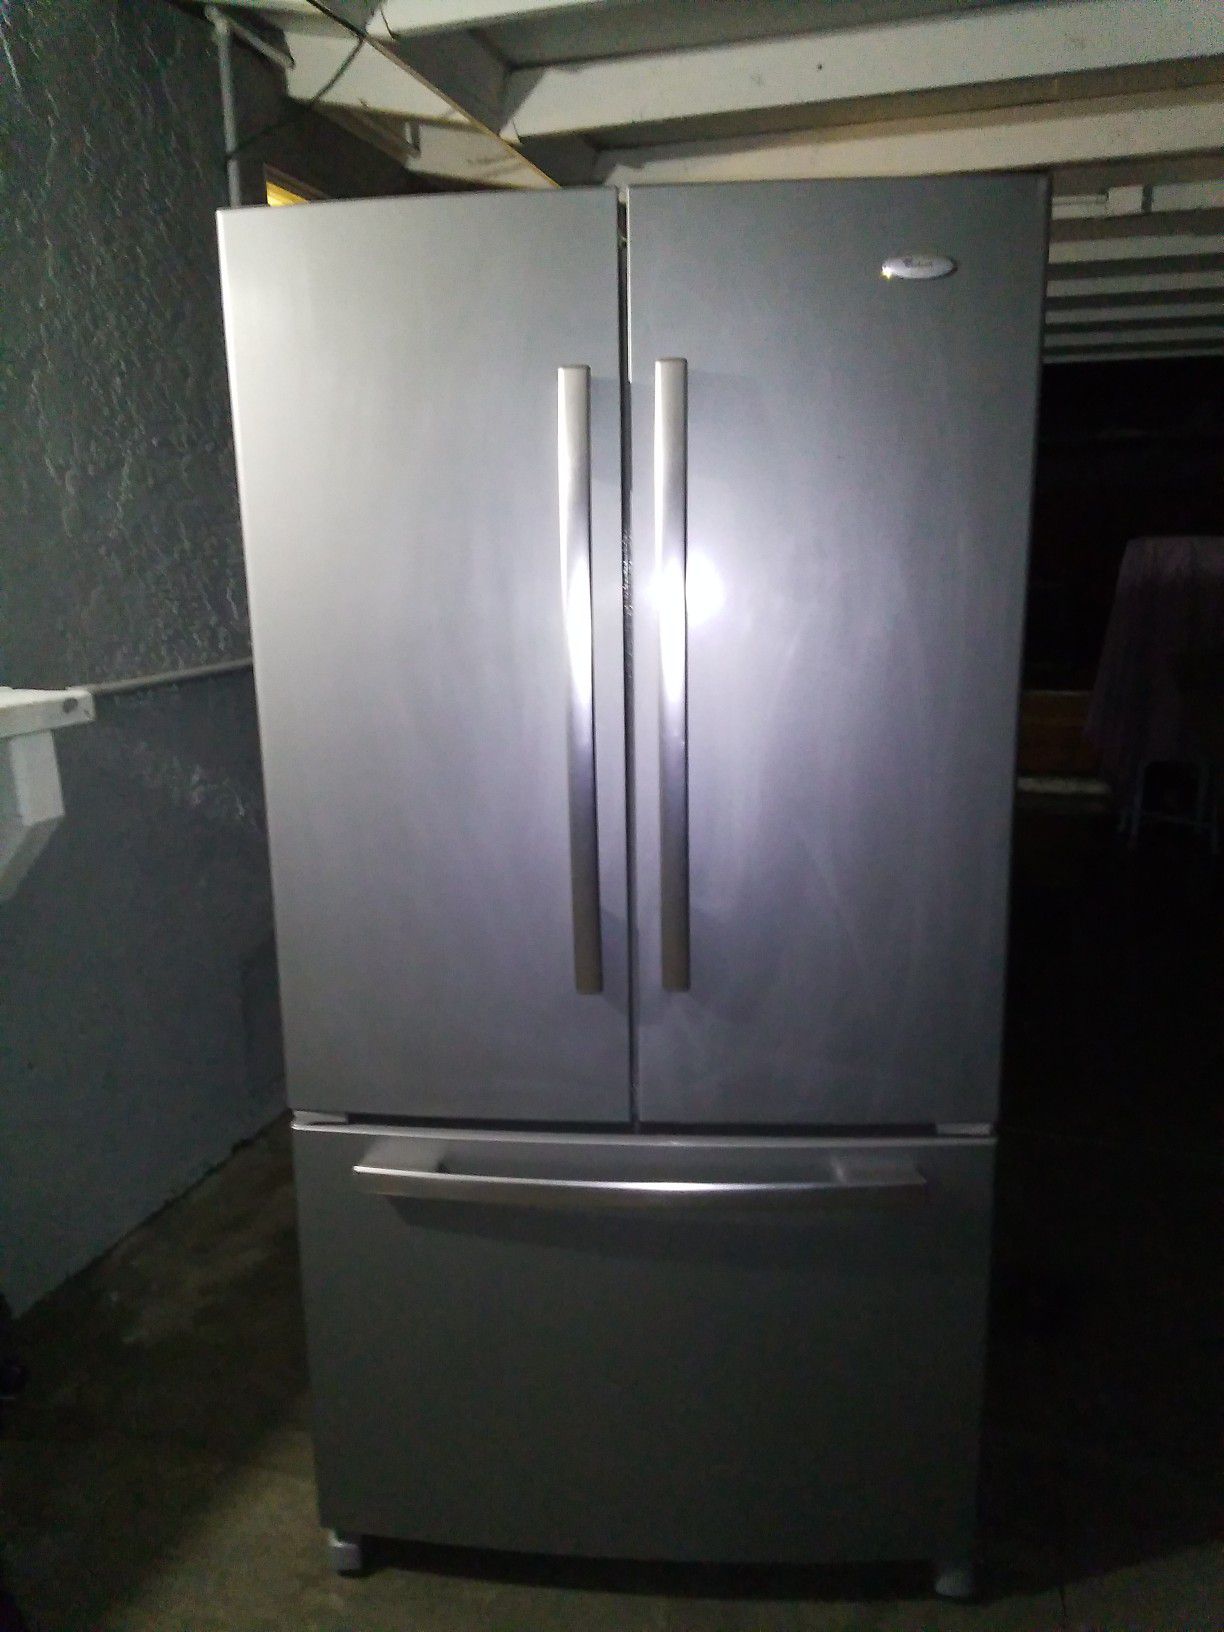 Whirlpool gold stainless steel and gray french door refrigerator / freezer. Only one month old! Works and looks like new!